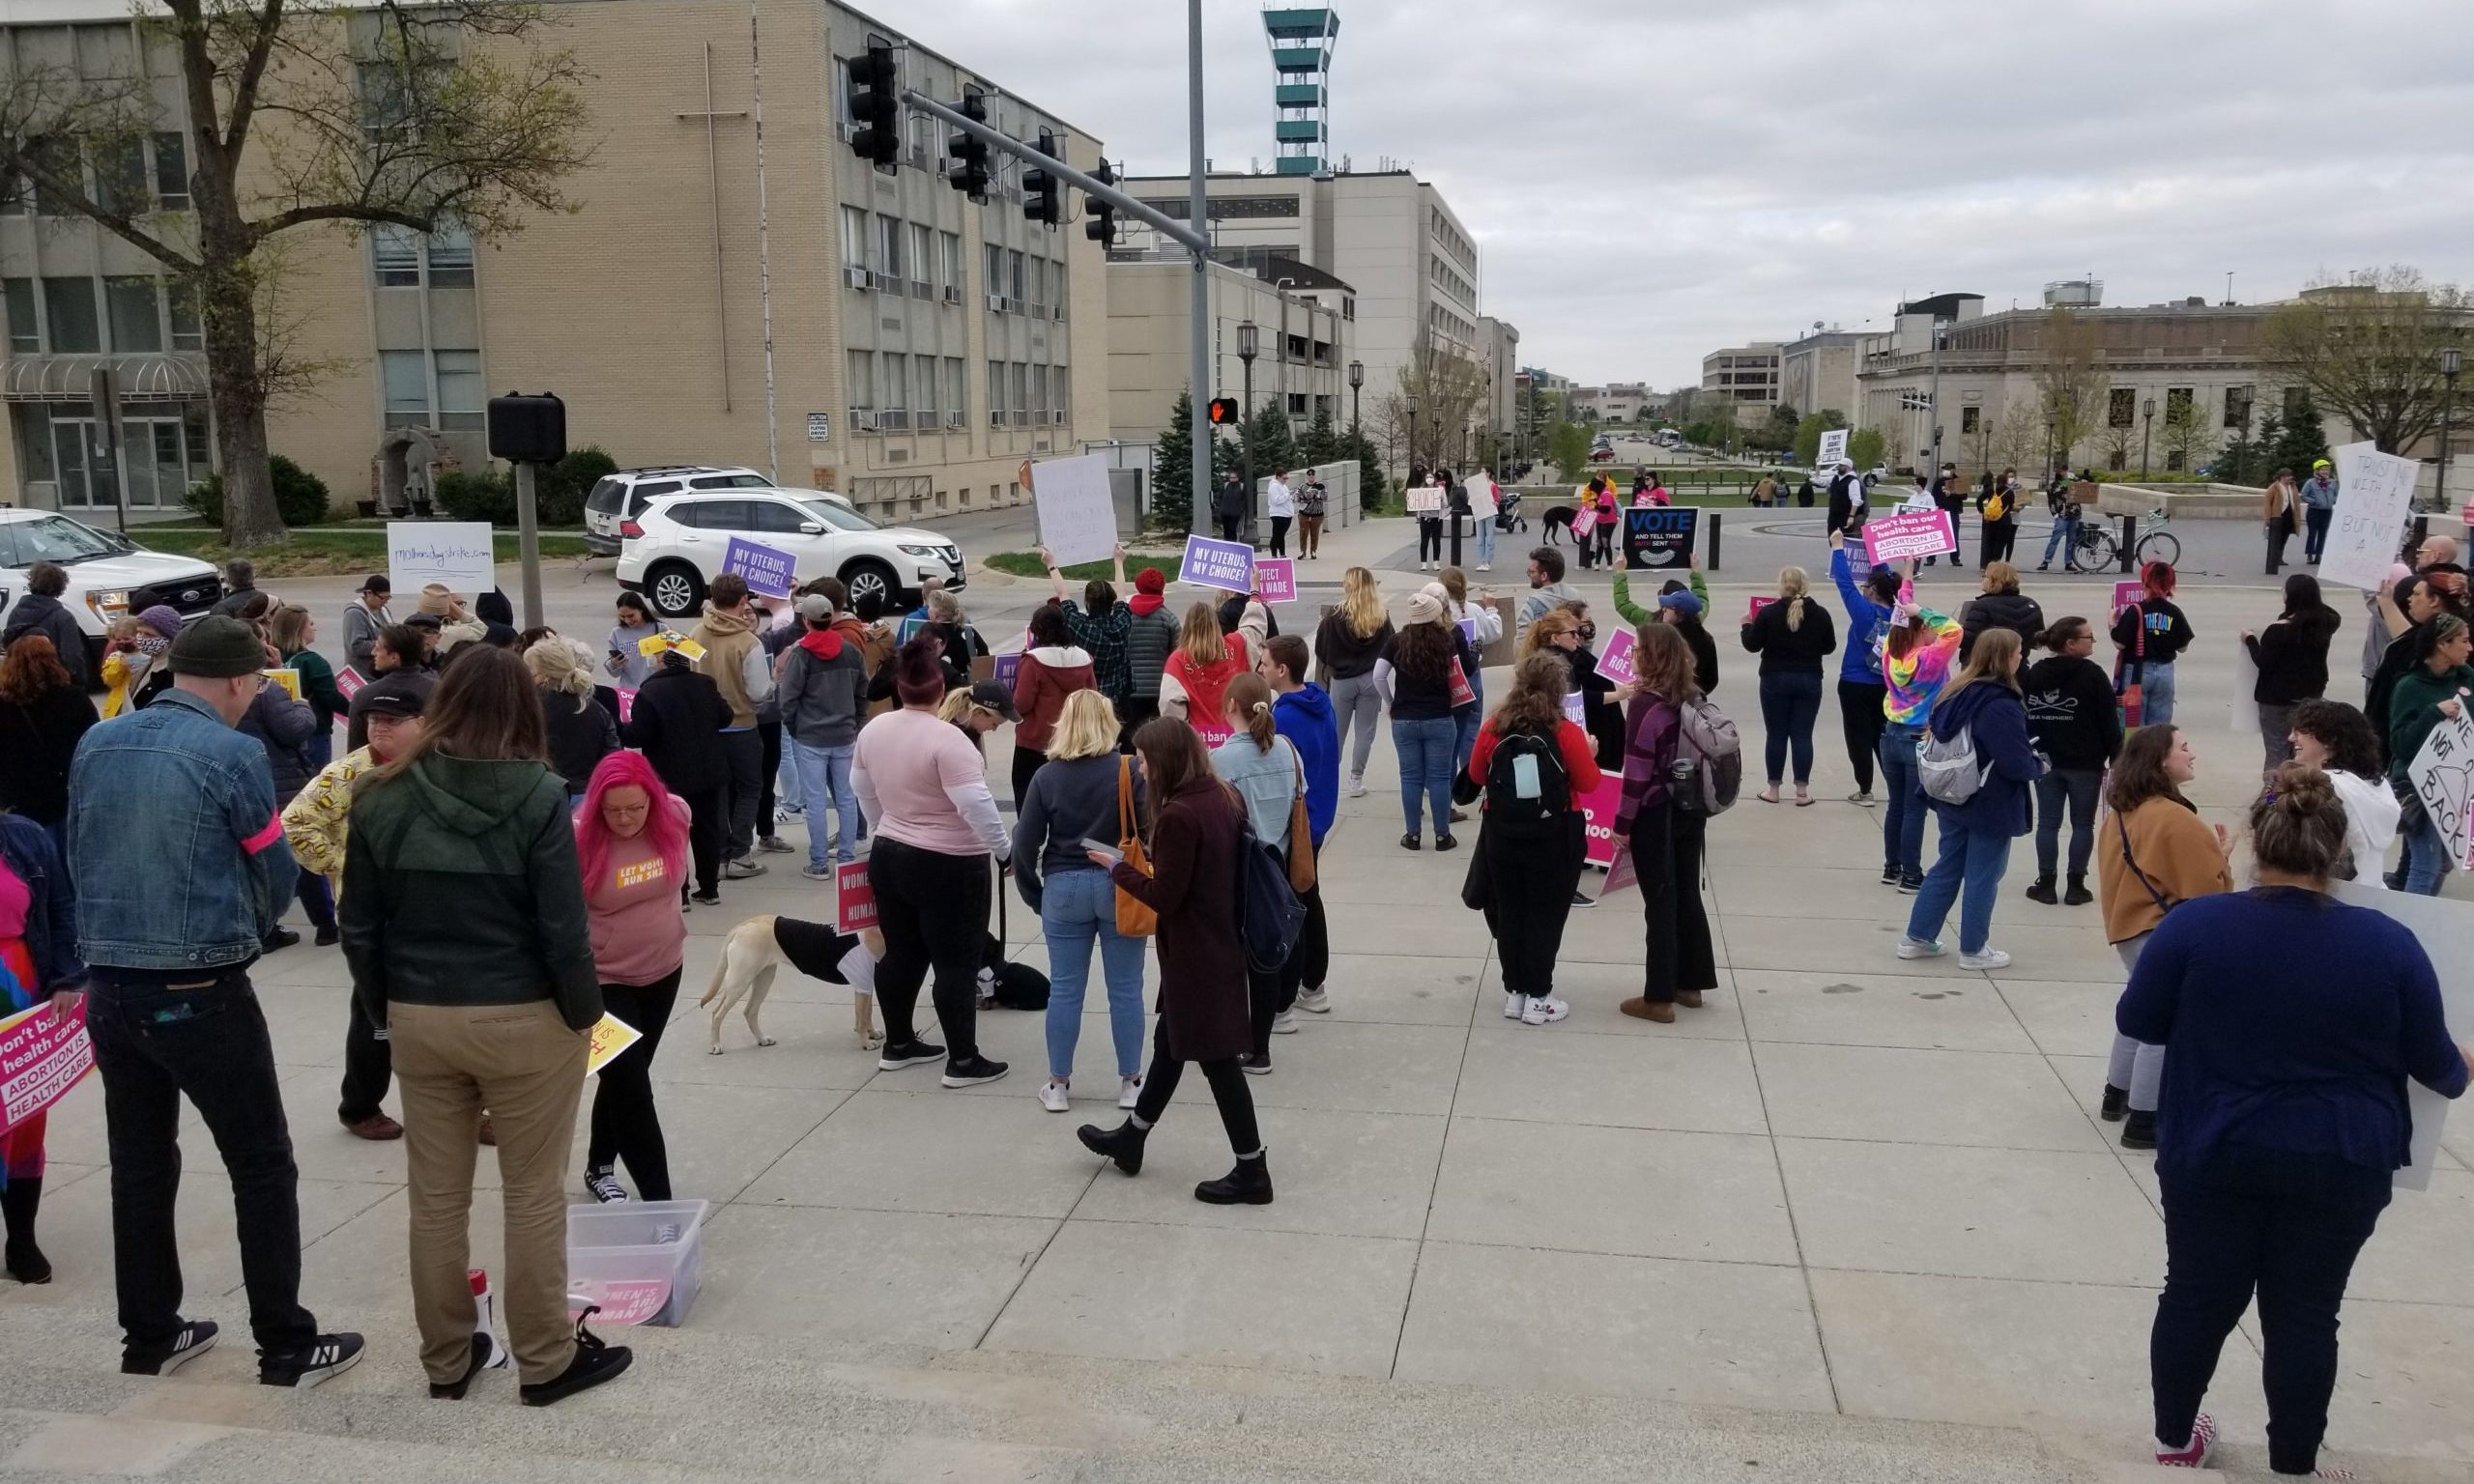 Protesters gather at capitol to oppose leaked opinion draft of Dobbs v. Jackson. 05.02.2022